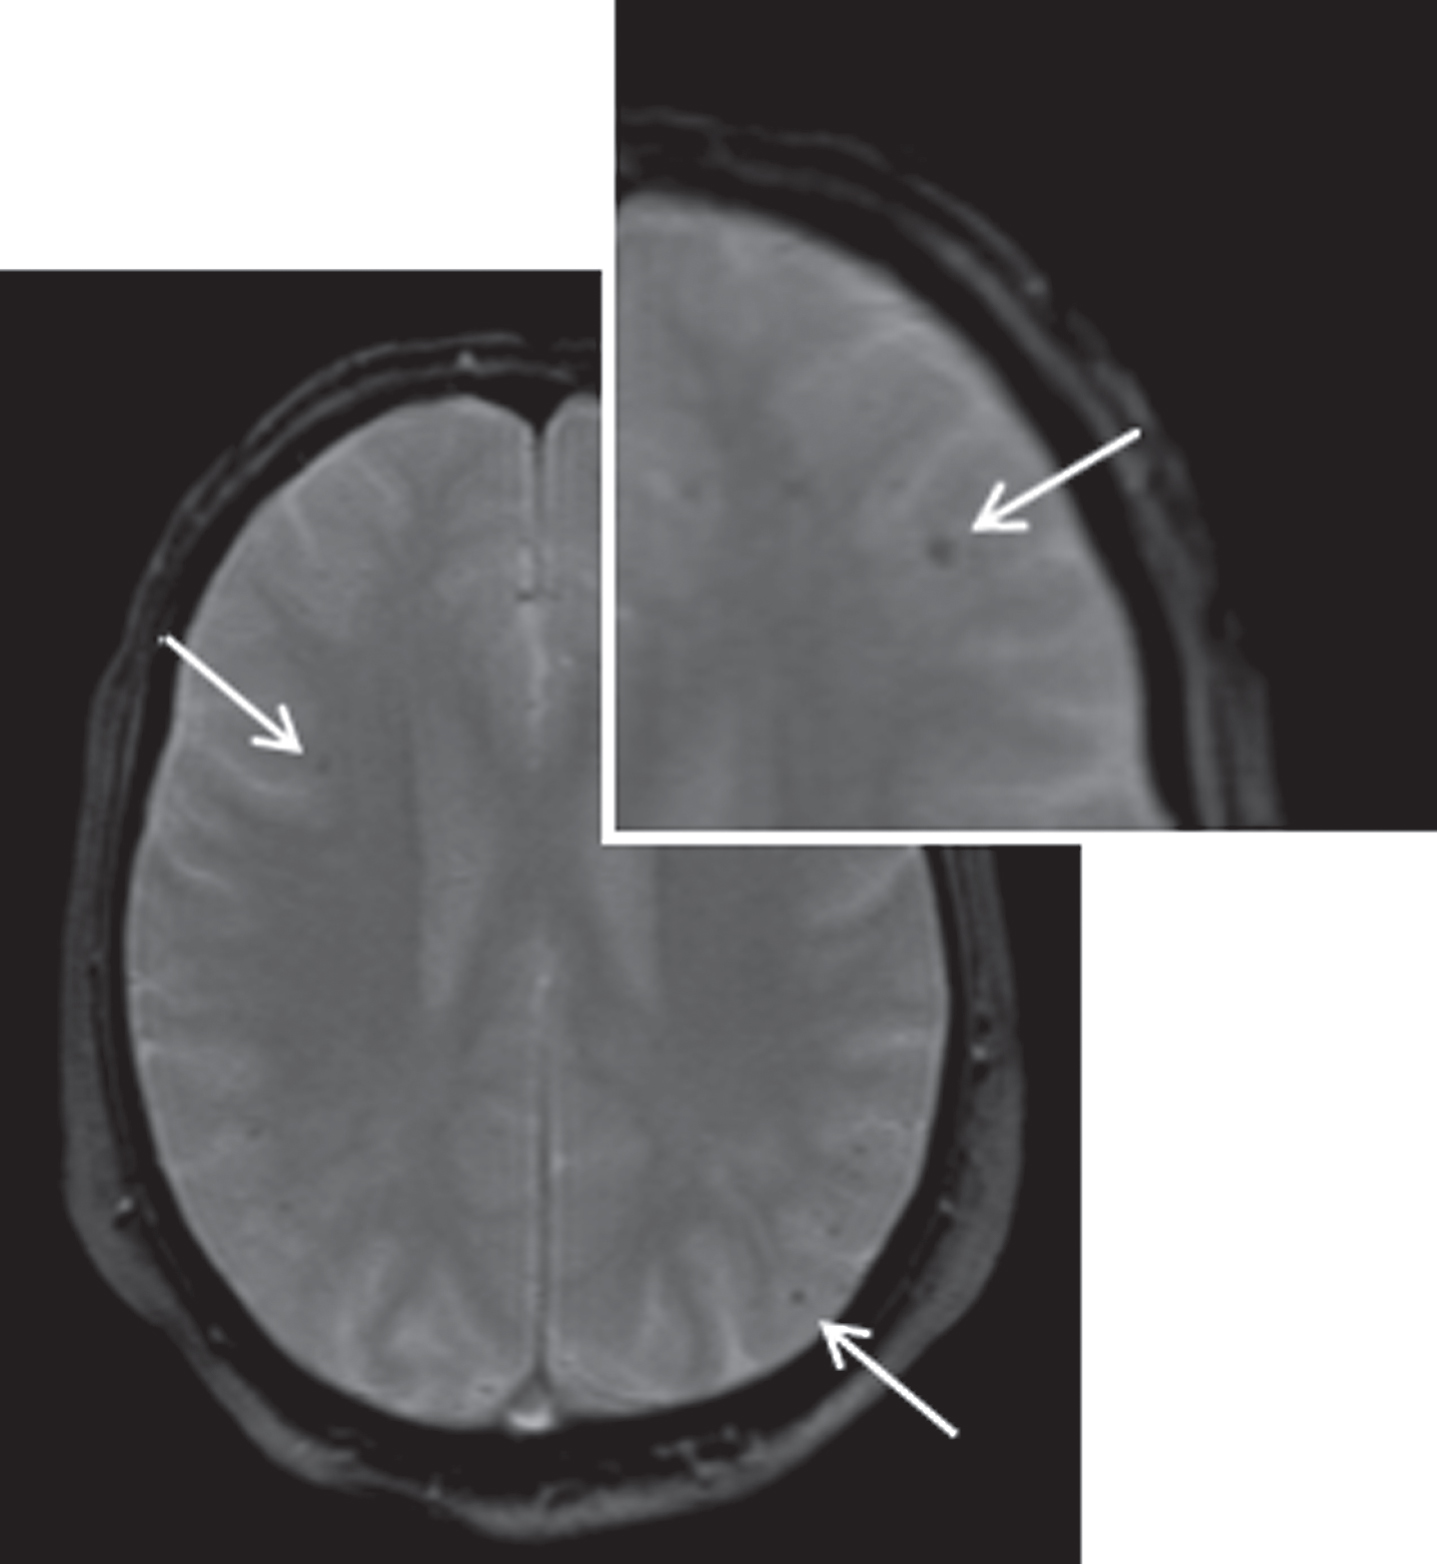 Baseline MR imaging of subject II.6. Cerebral MRI imaging of subject II.6 at age 70 showing several microbleeds (arrows). T2 weighted image.